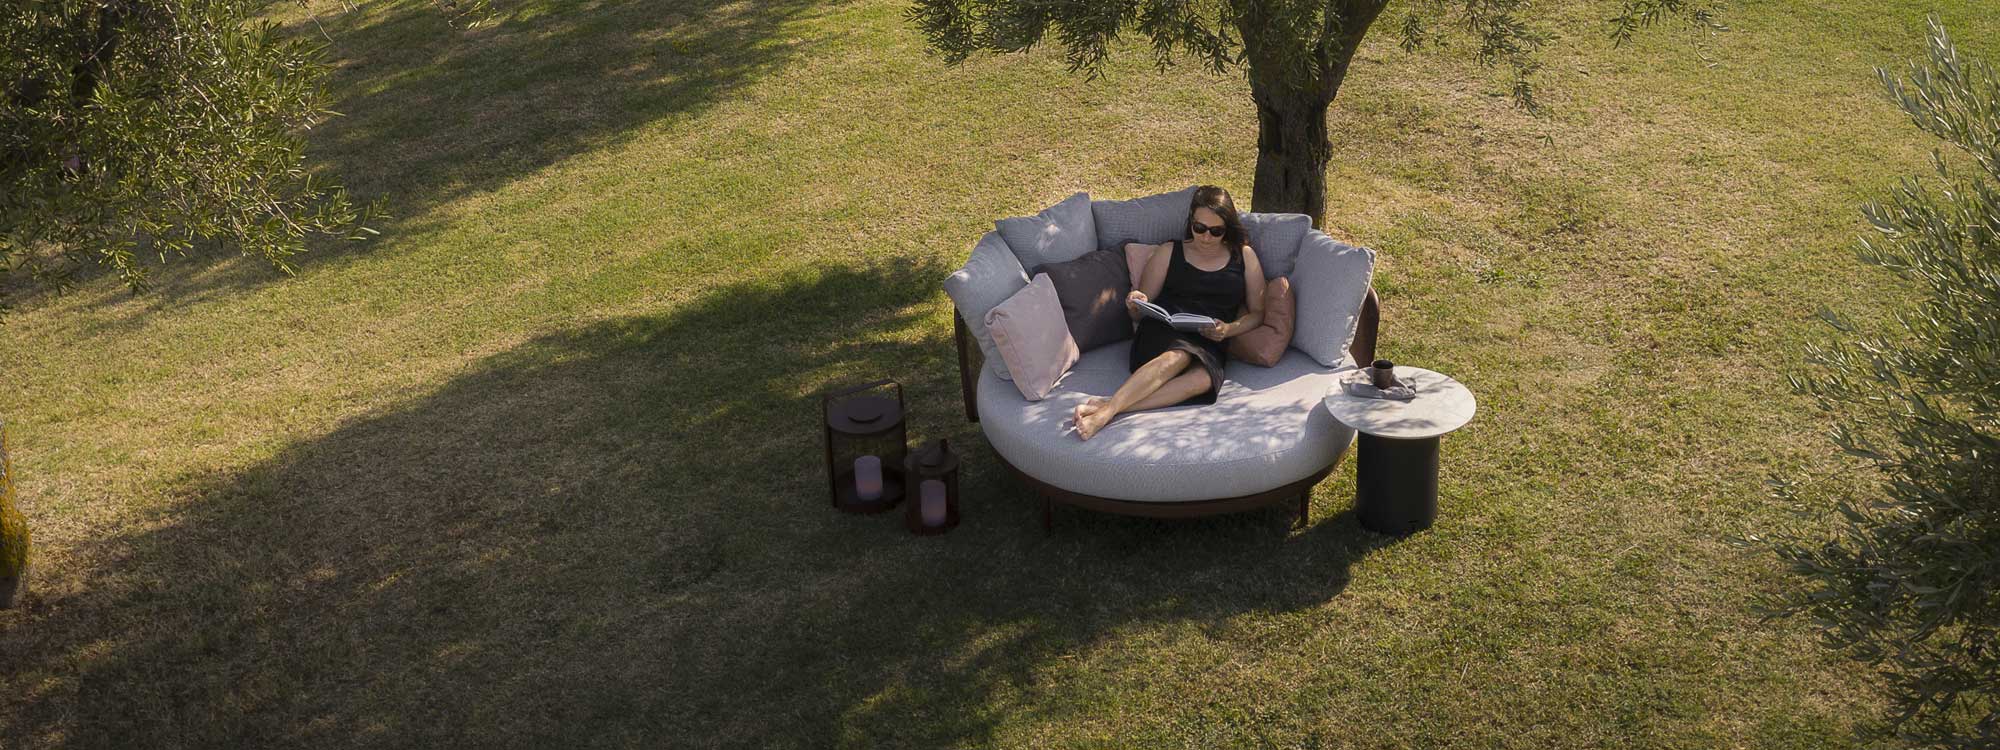 Woman relaxing on Baza luxury garden daybed beneath shade of tree